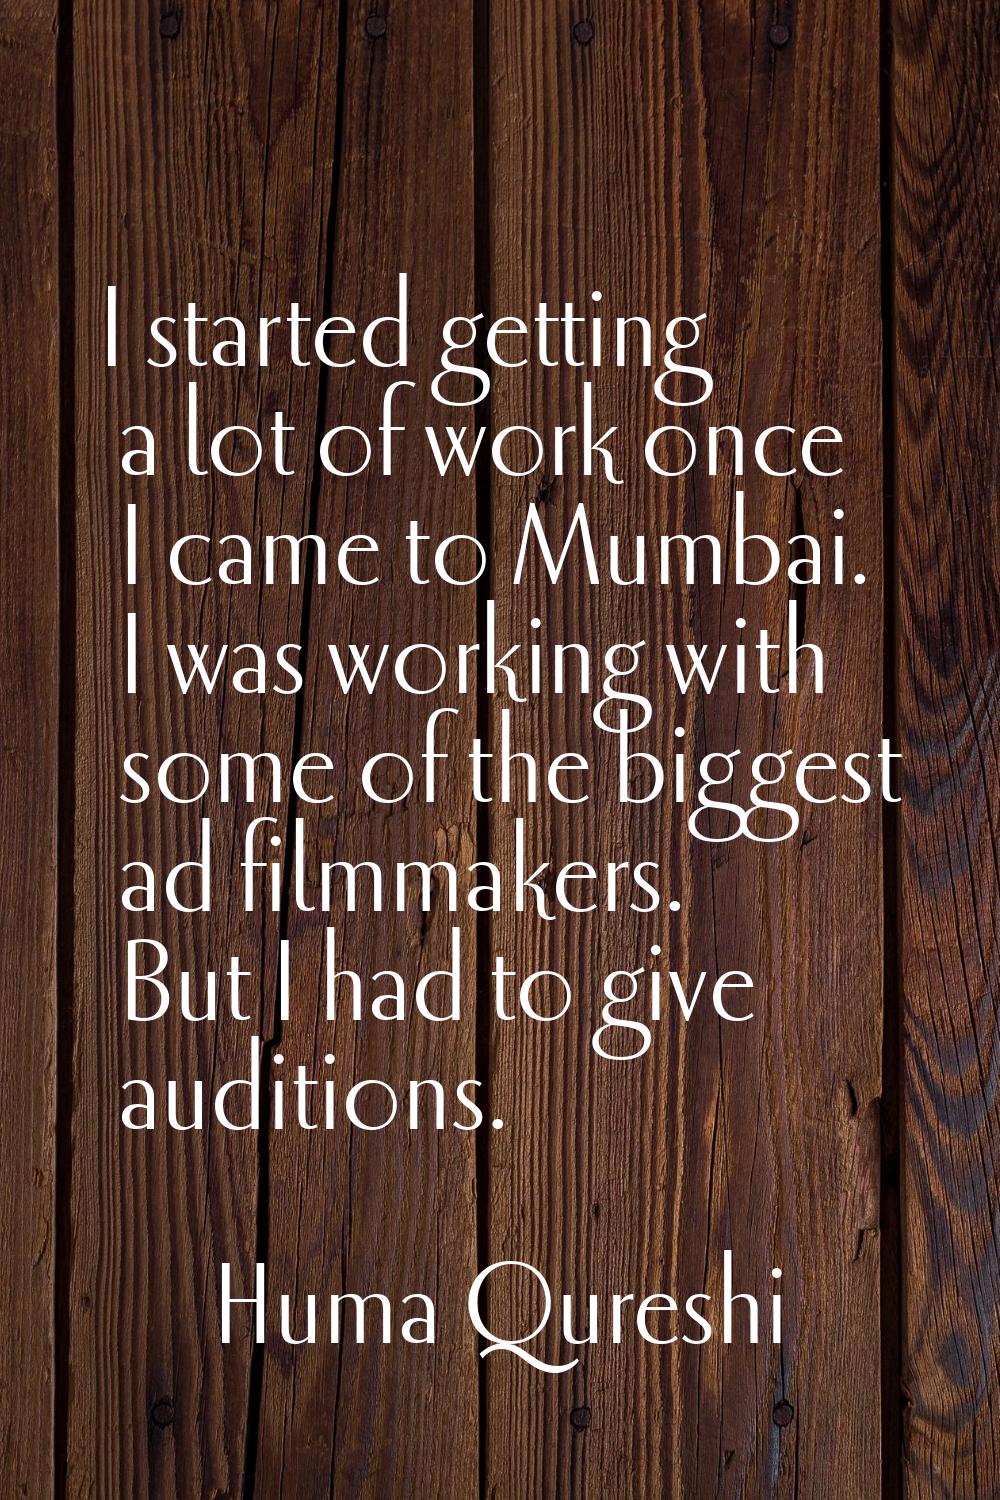 I started getting a lot of work once I came to Mumbai. I was working with some of the biggest ad fi